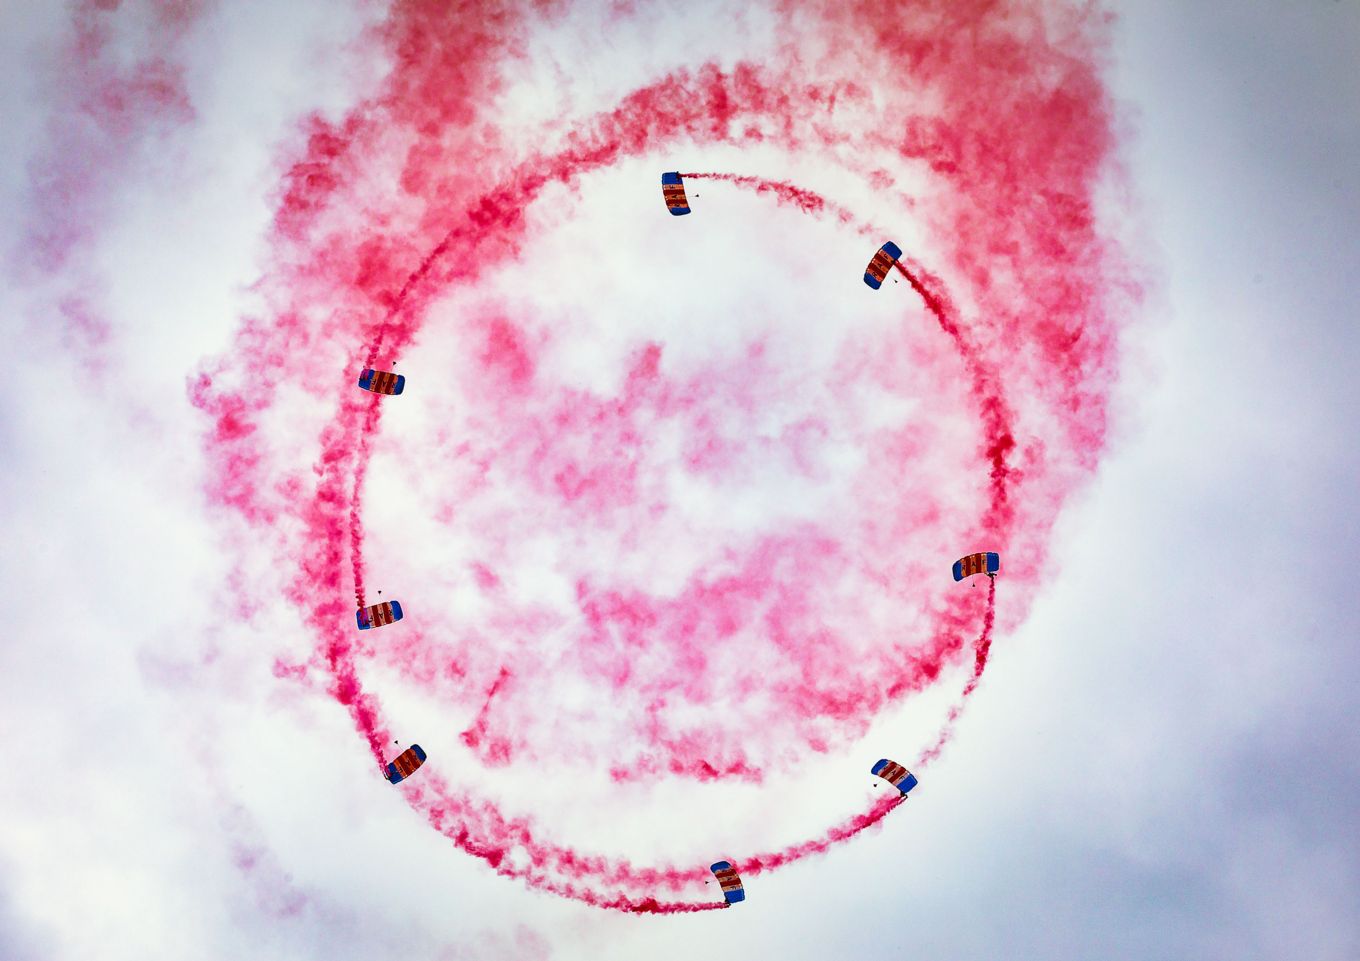 Parachuting Display Team performing above, with red smoke trails.